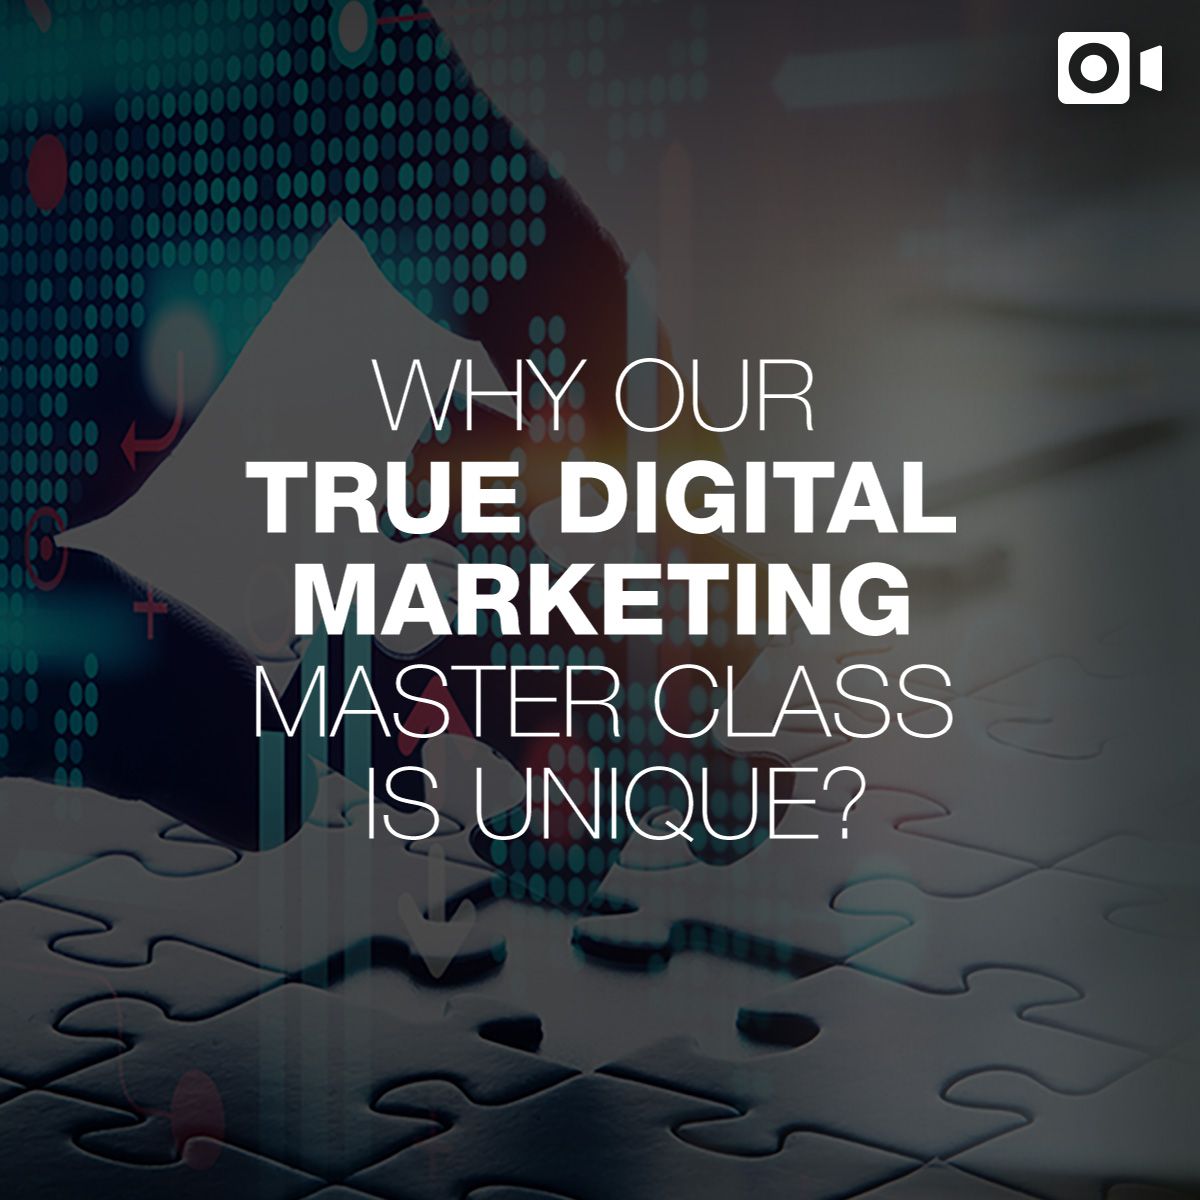 Reel: Why Our True Digital Marketing Master Class Is Unique?